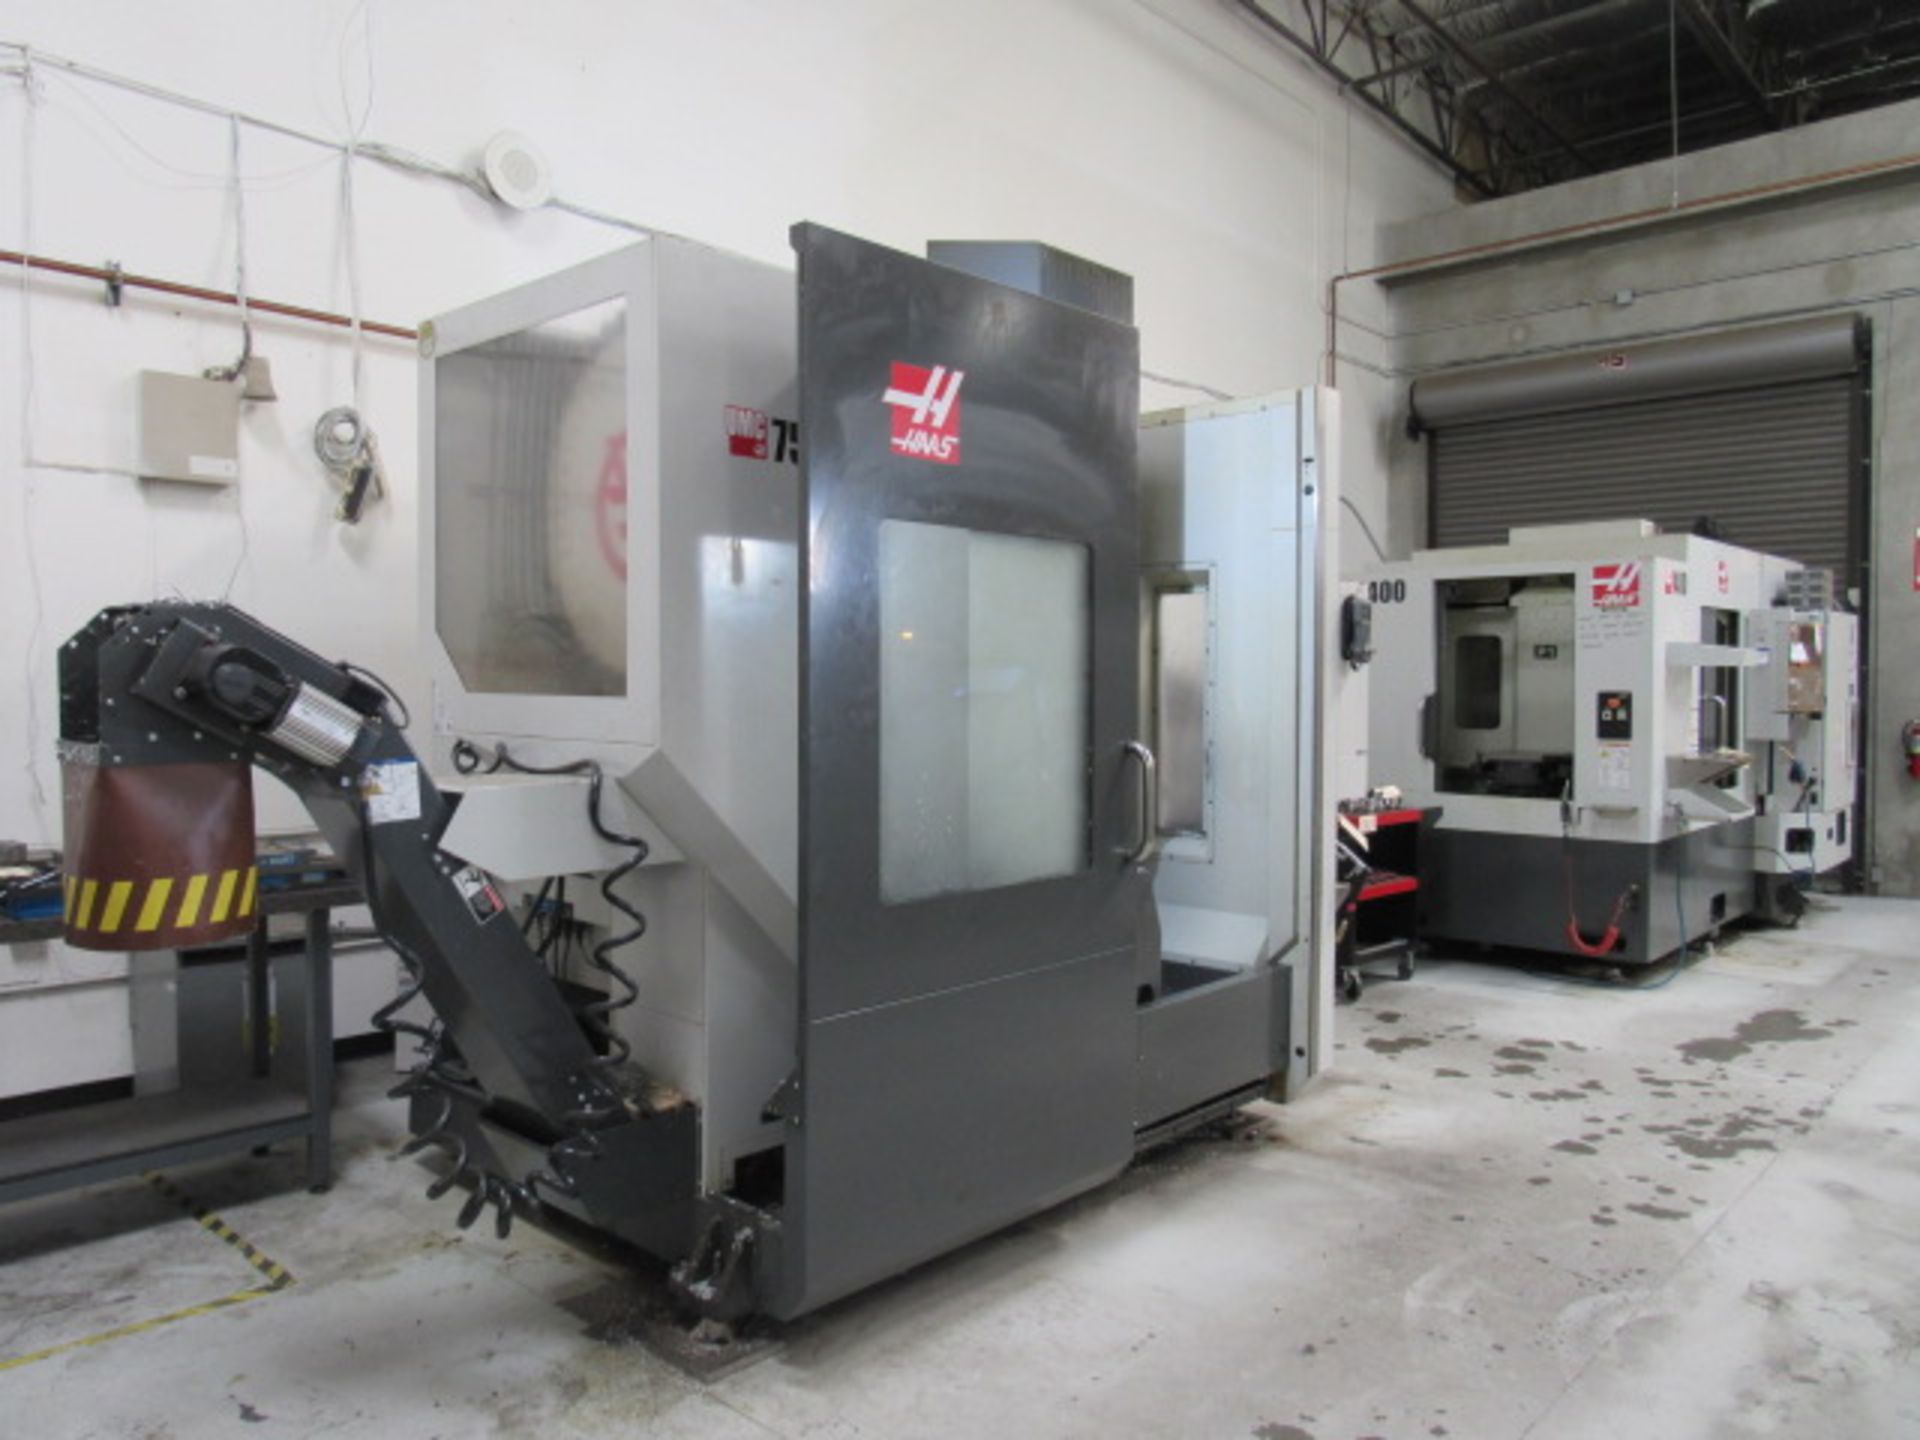 Haas UMC750 5-Axis CNC Vertical Machining Center - Image 7 of 12